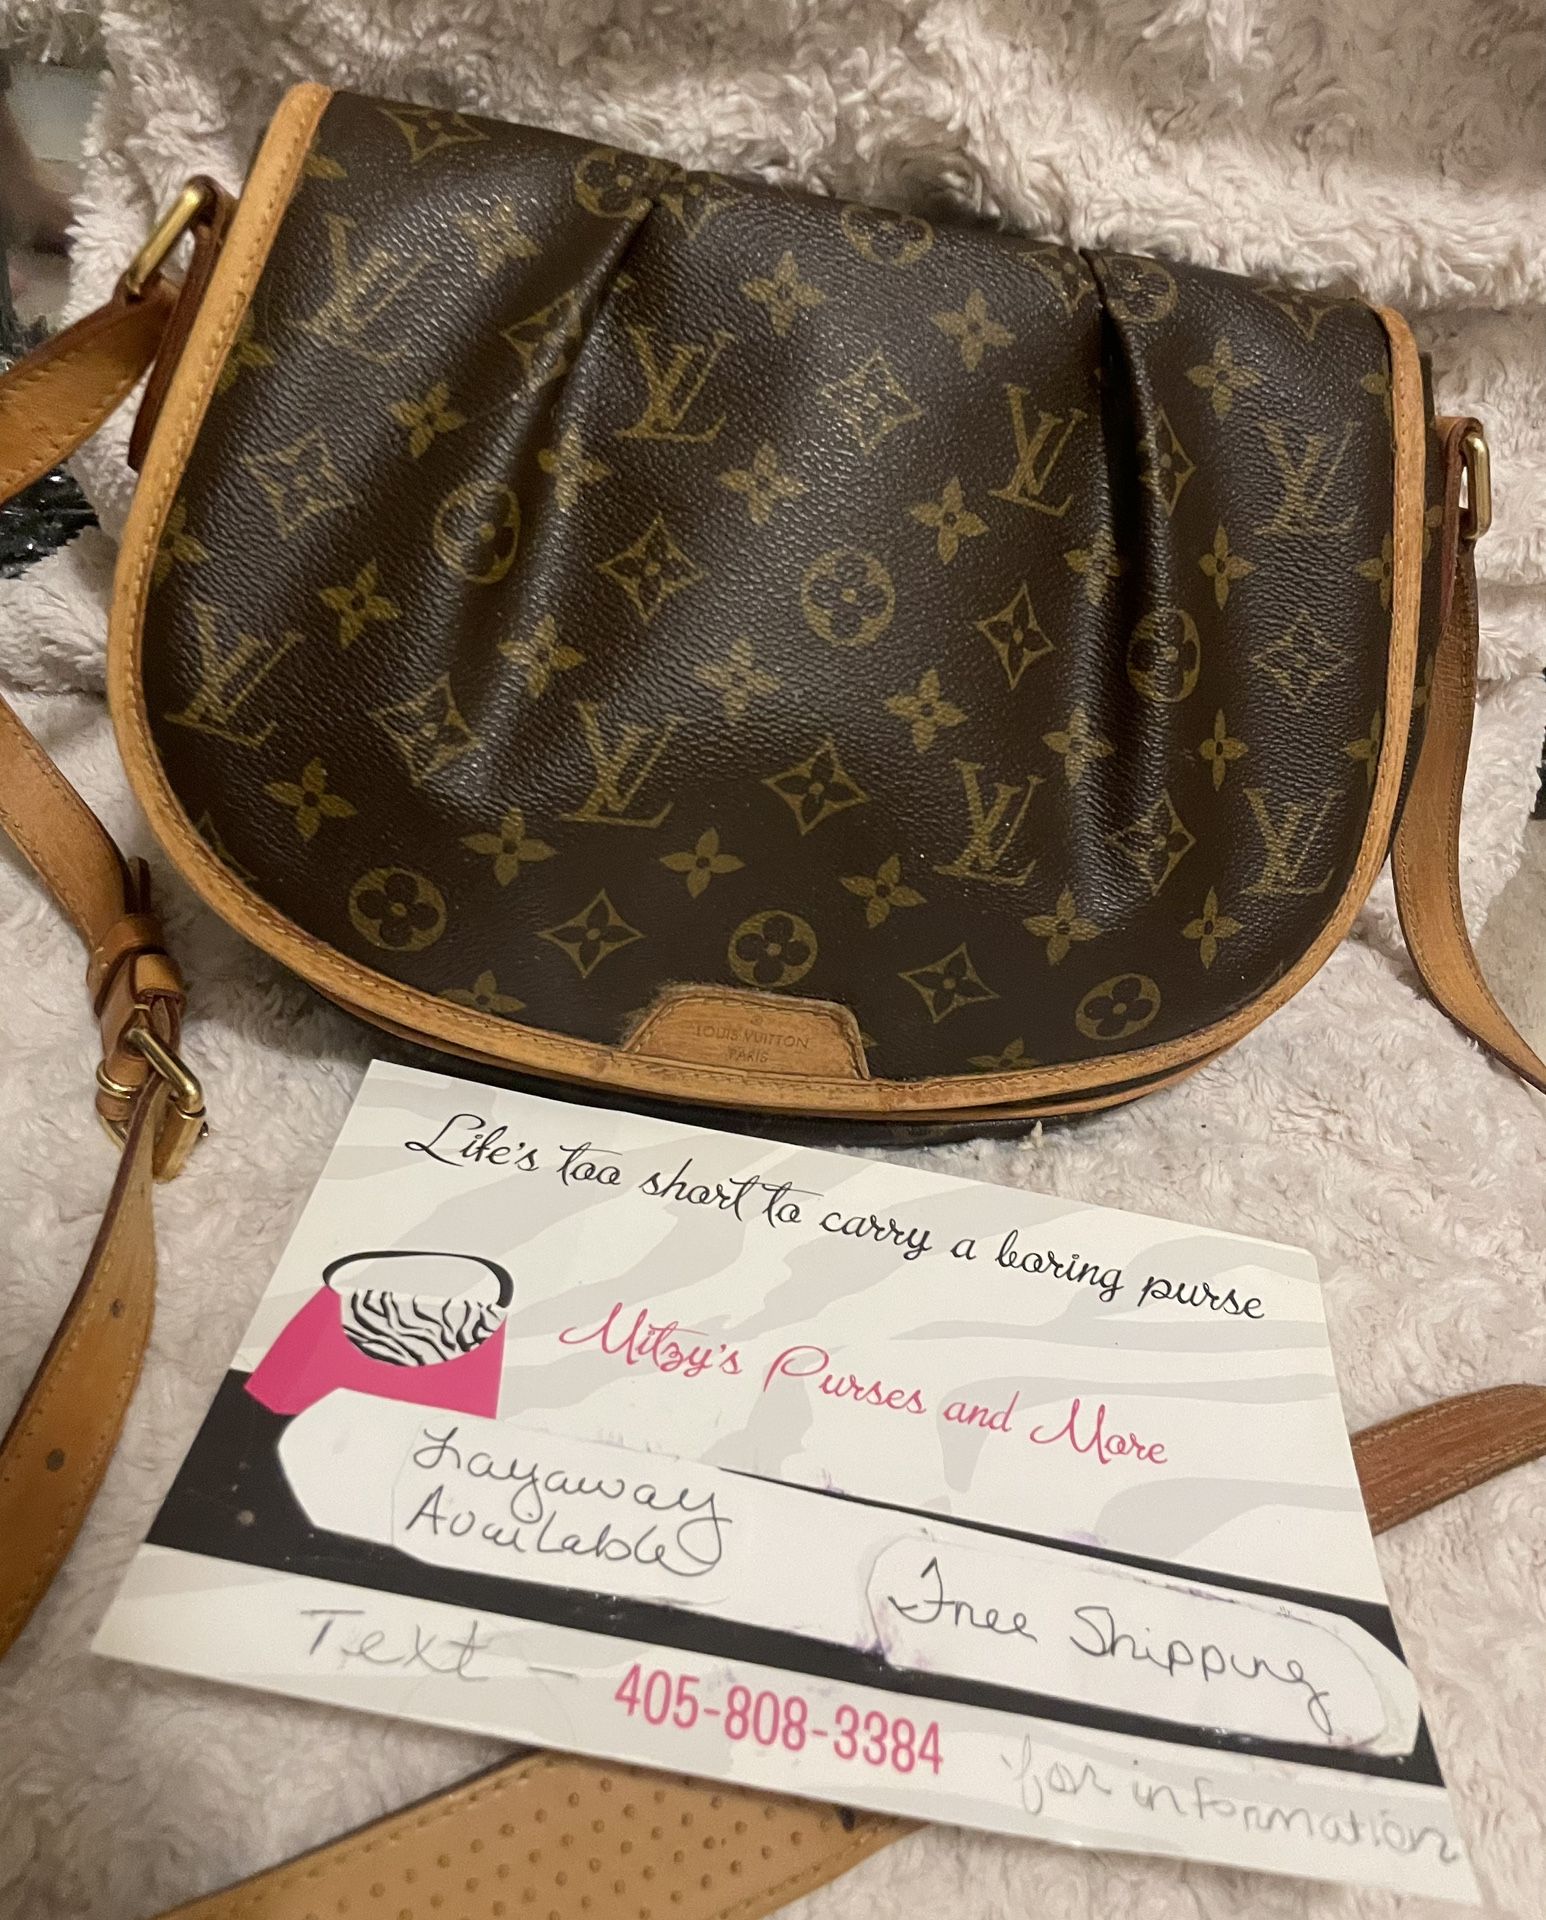 Authentic Louis Vuitton 2011 Crossbody/Shoulder Bag Being Listed By Mitzys Purses And More